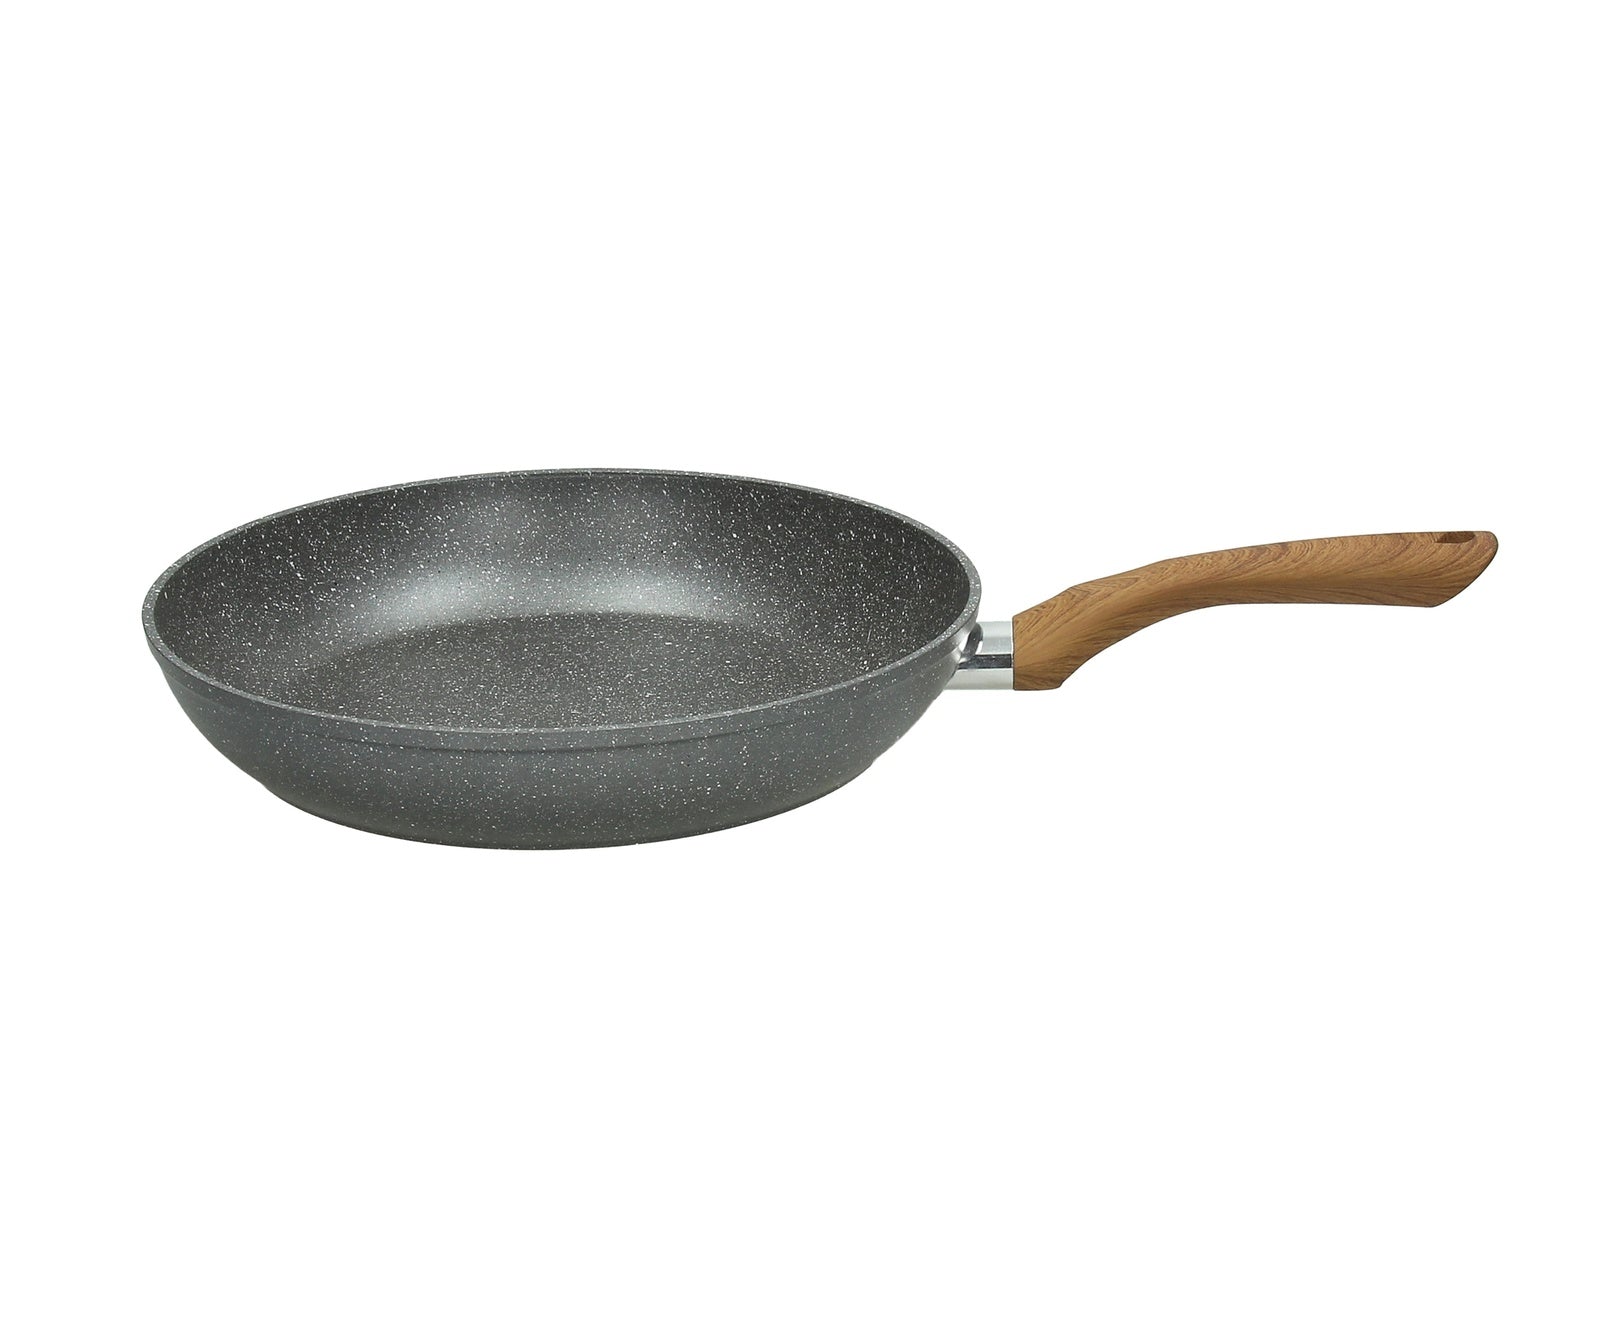 Wood & Stone Style Aluminum Nonstick 9.4" Fry Pan - Kitchen Tools and Utensils